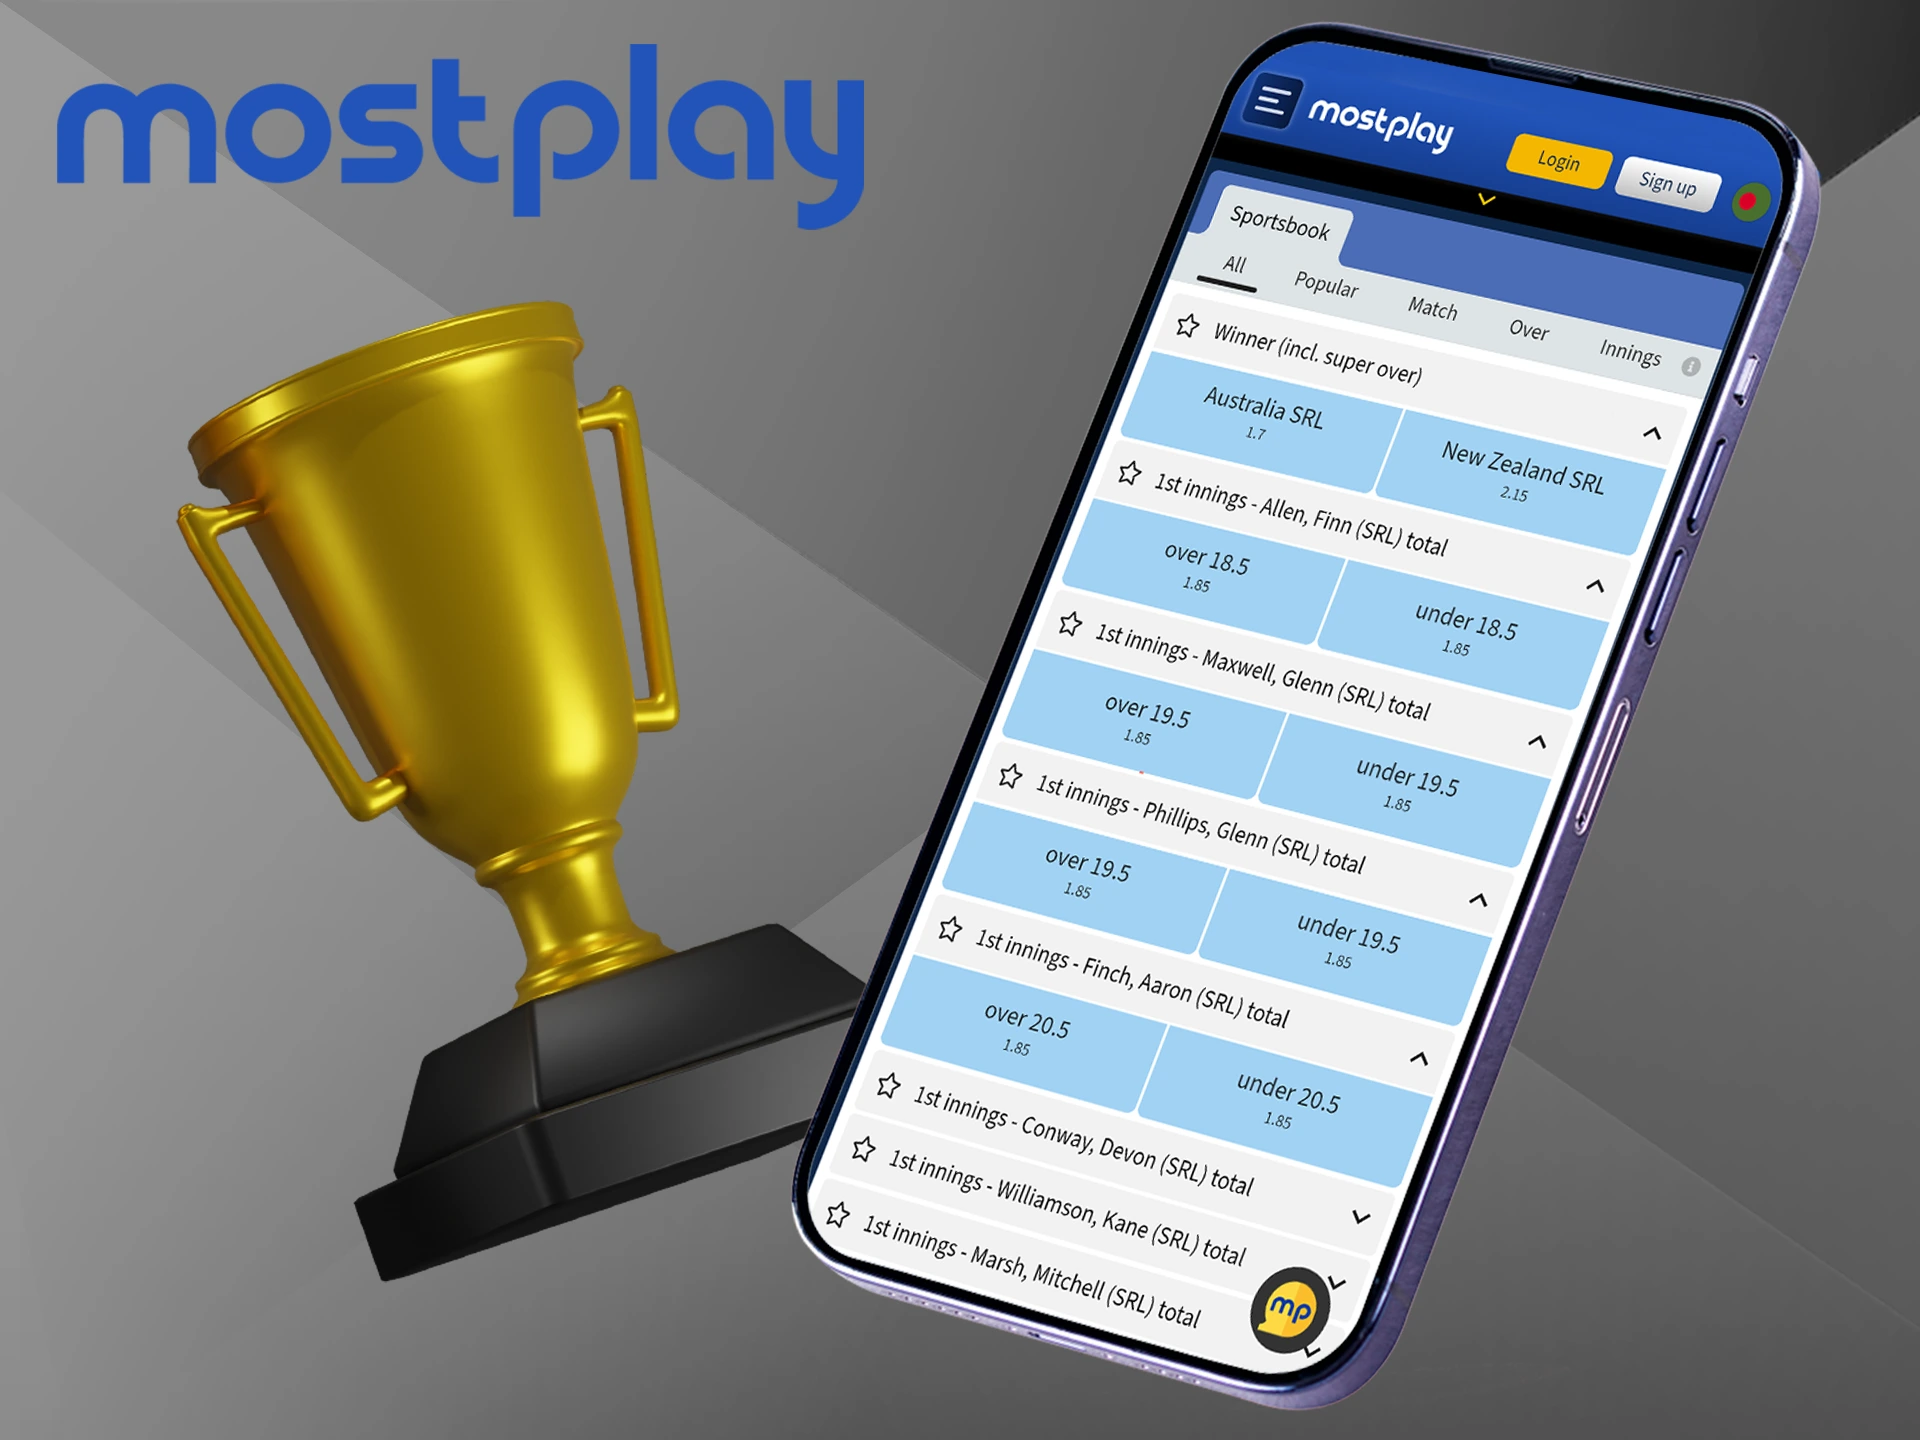 Place a bet on your favorite cricket team at Mostplay and wait for the match to end.